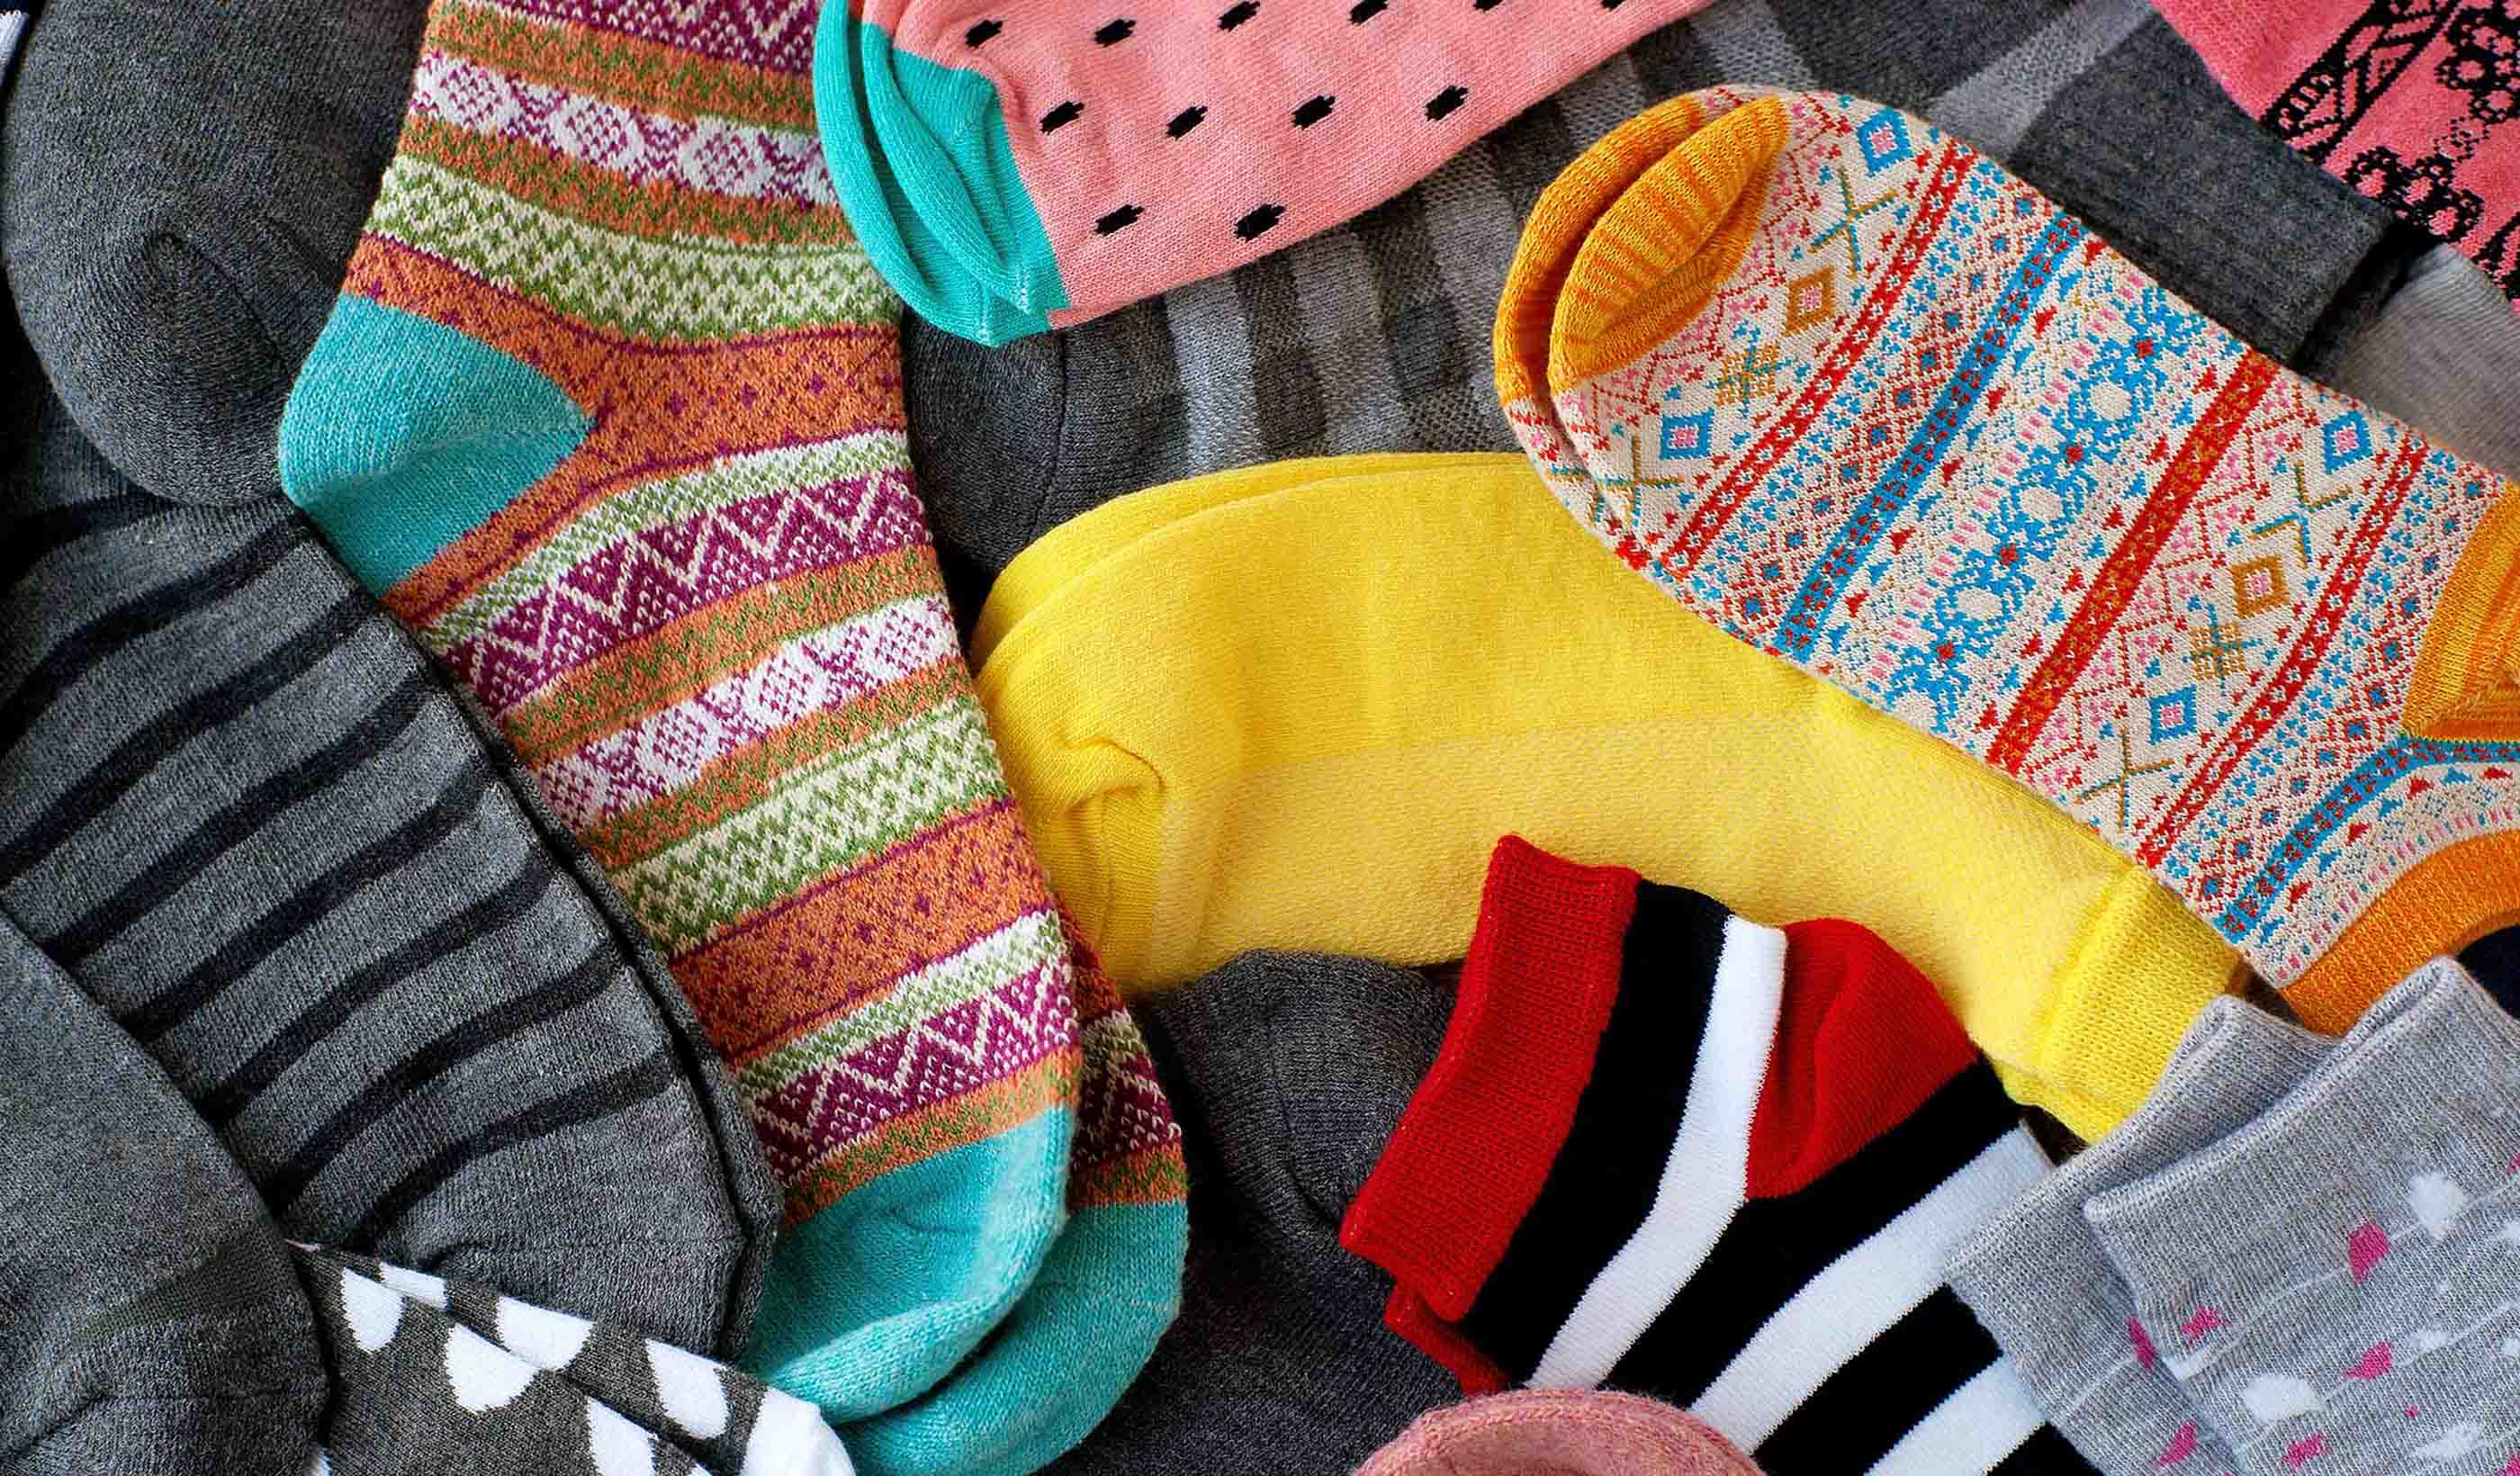 Stantec’s North American Holiday sock donation initiative